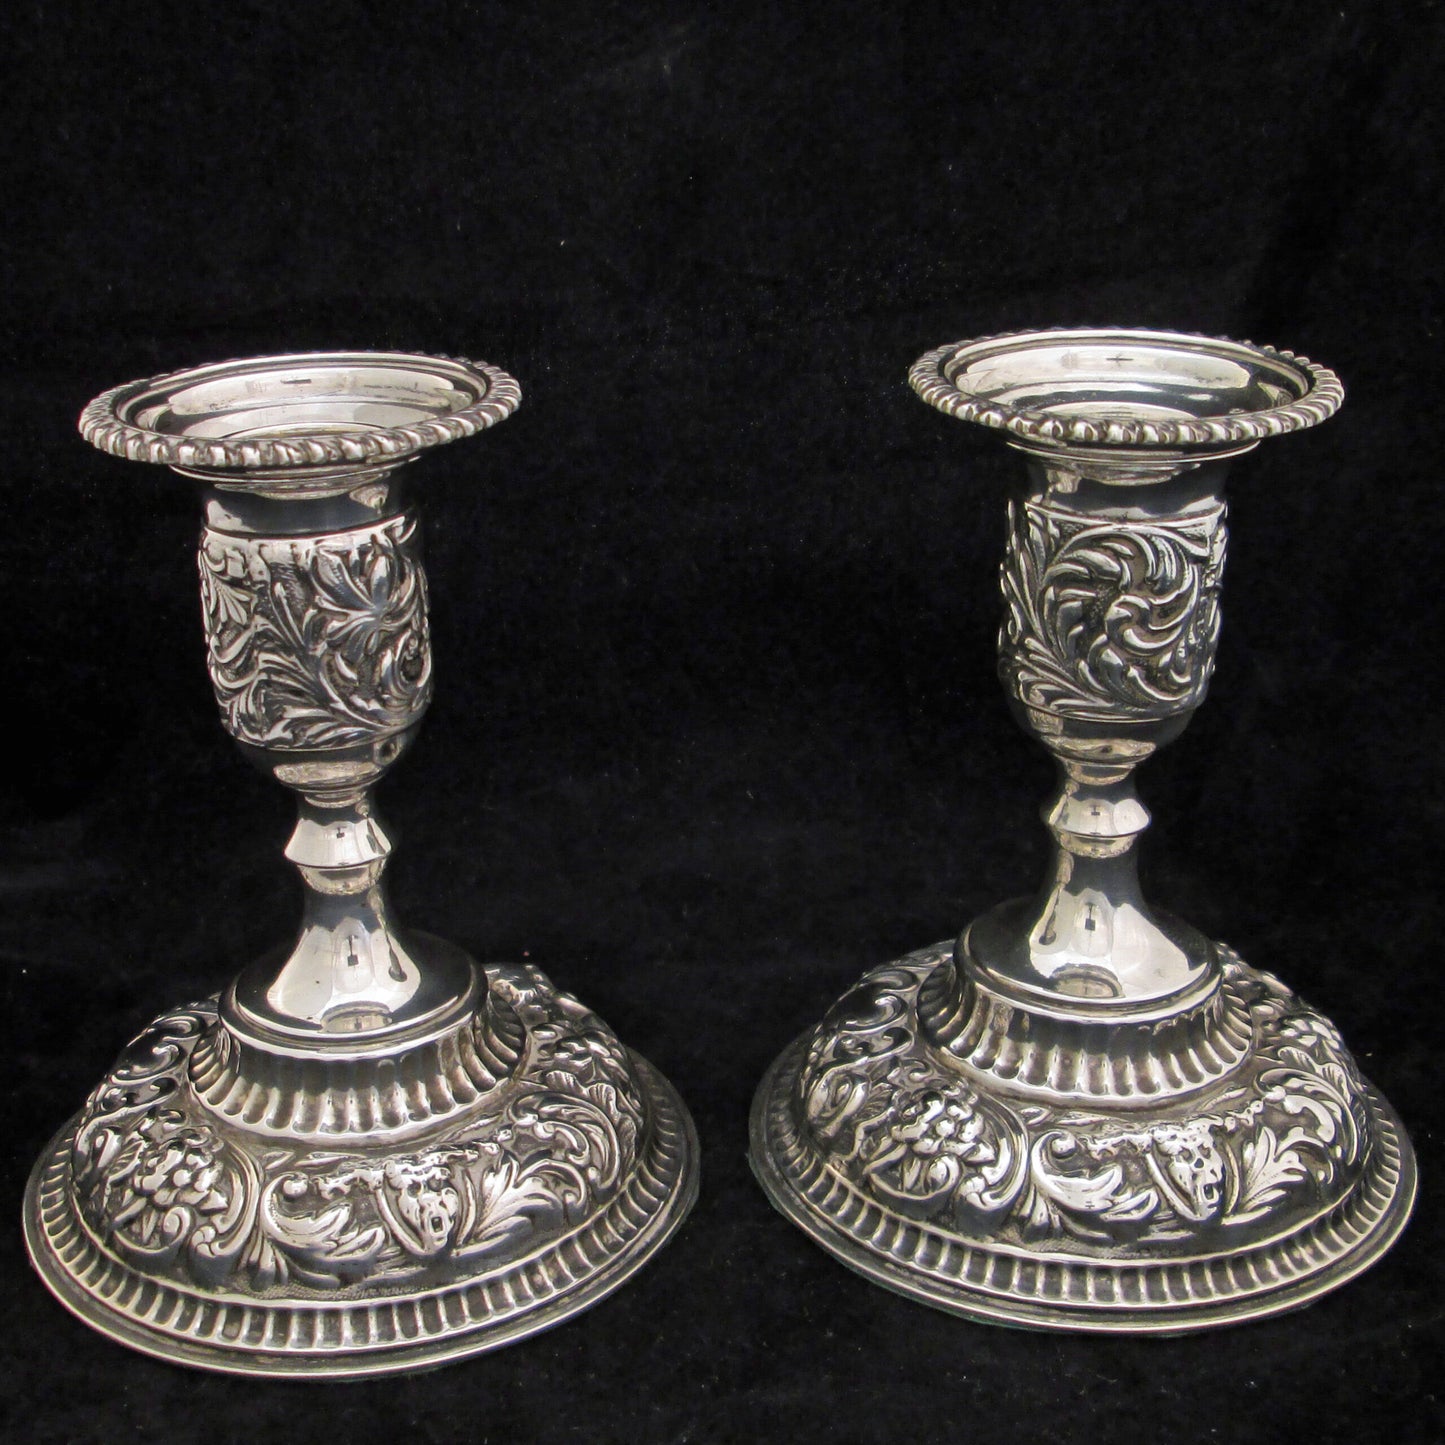 A pair of sterling silver embossed candlesticks.